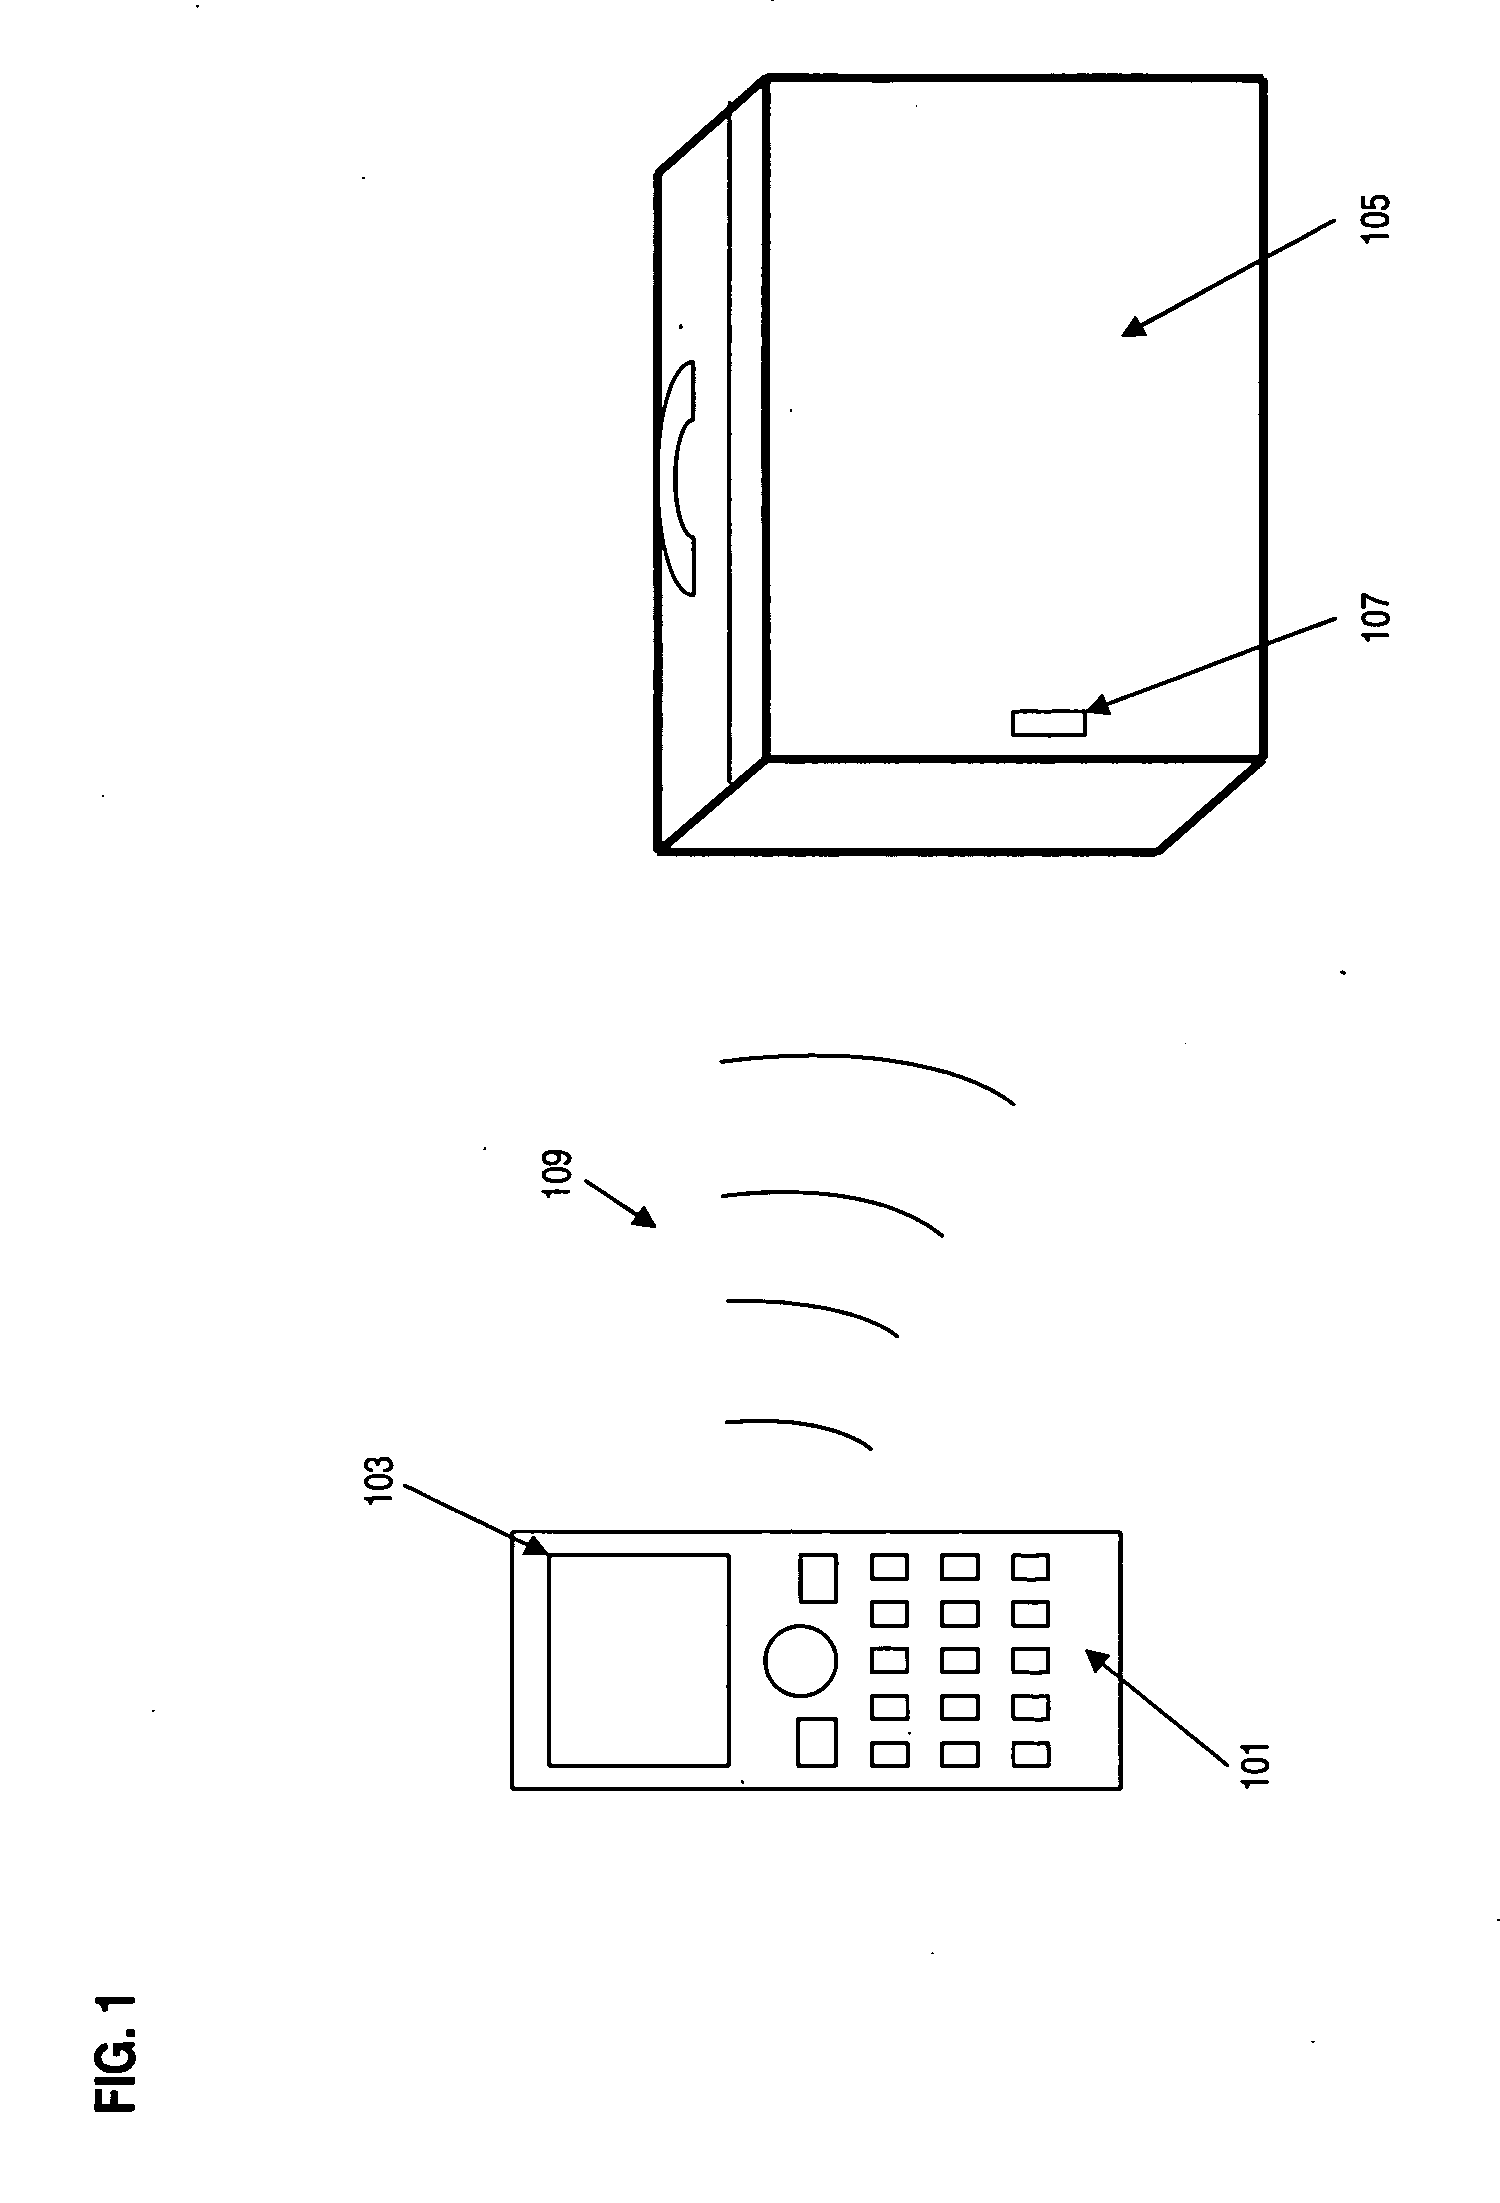 Environment responsive mobile communication device operation